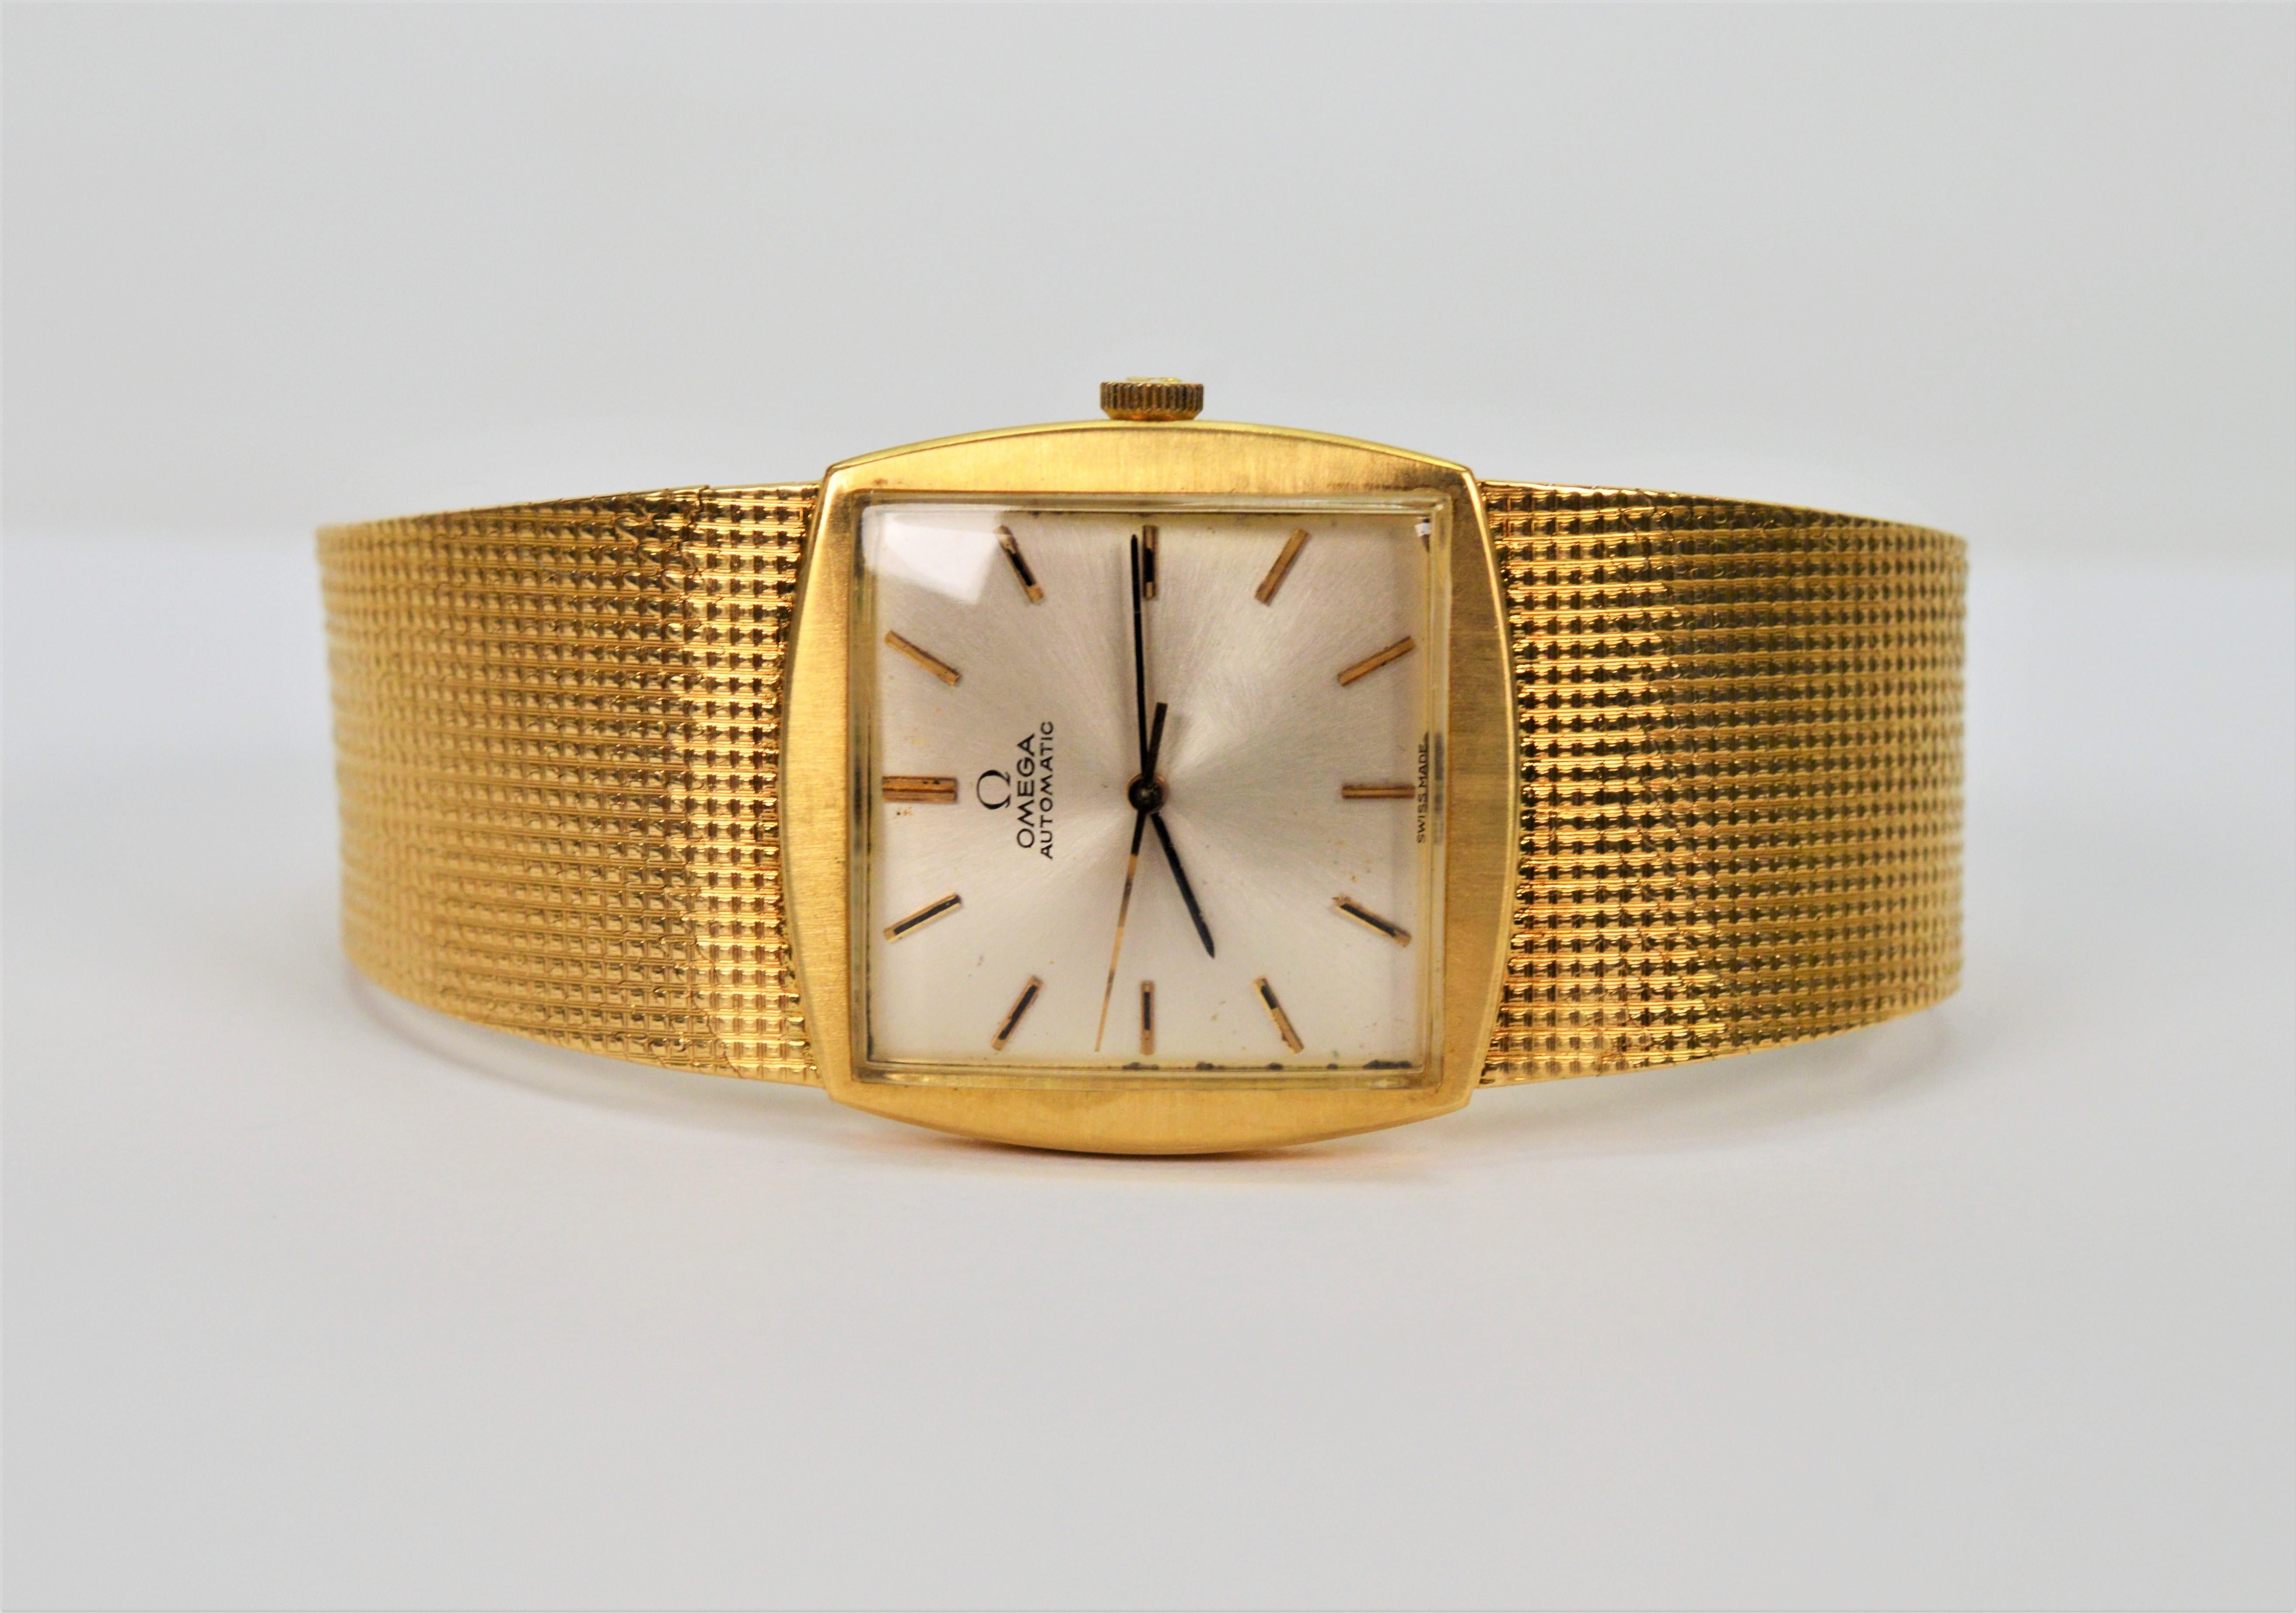 Bold, all in 18 Karat Yellow Gold, this sleek Omega Men's Dress Wrist Watch evokes the revered elegance and style of its era. Circa mid 1960's, this retro Omega beauty has an Swiss automatic movement #23162809. The satin polished gold square case